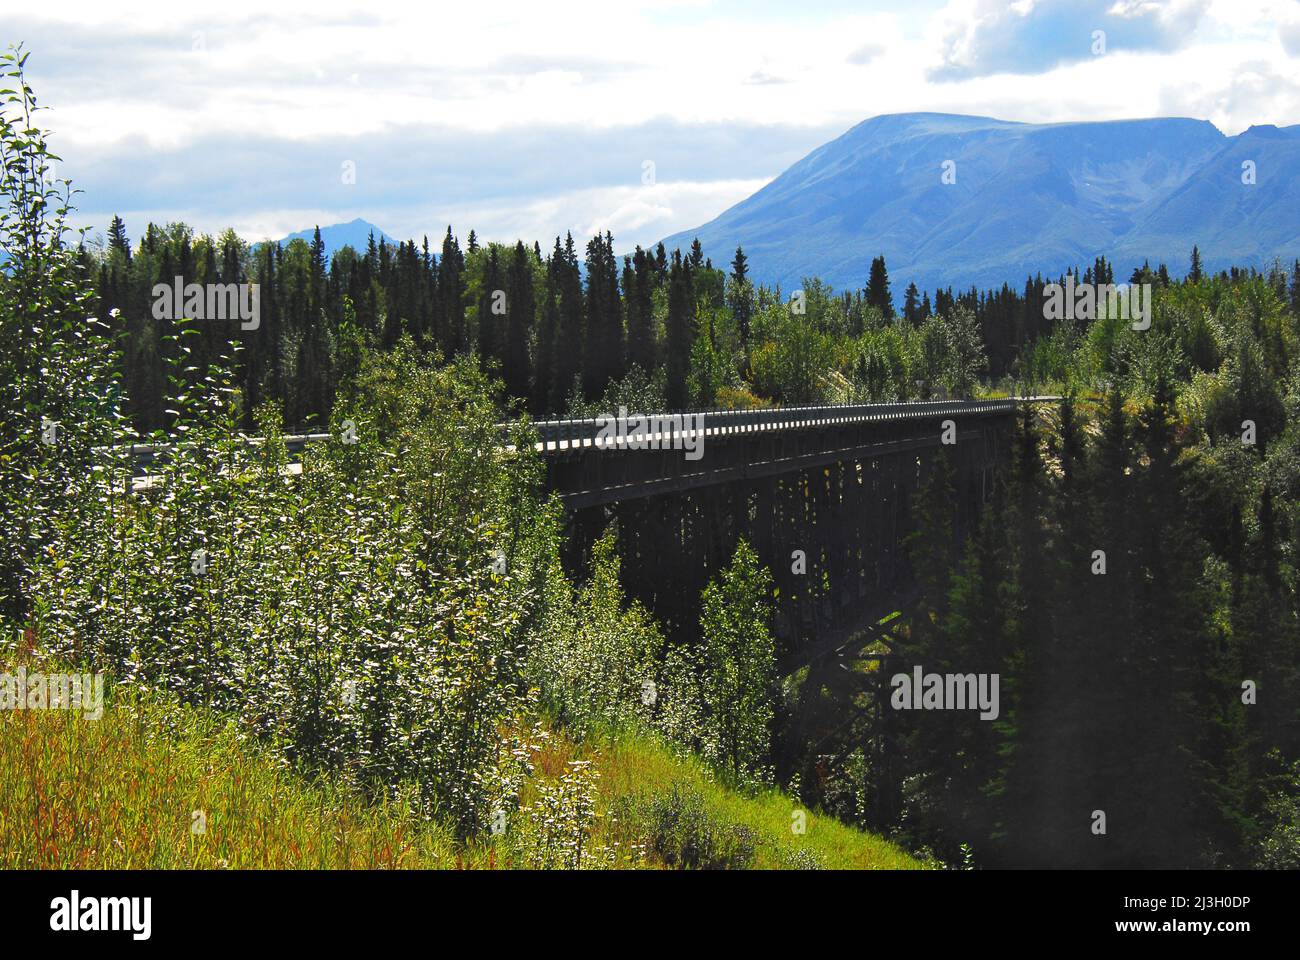 Panoramic landscape of bridge, gorge and mountains in less discovered beautiful Wrangell-St. Elias National Park in Alaska, USA Stock Photo